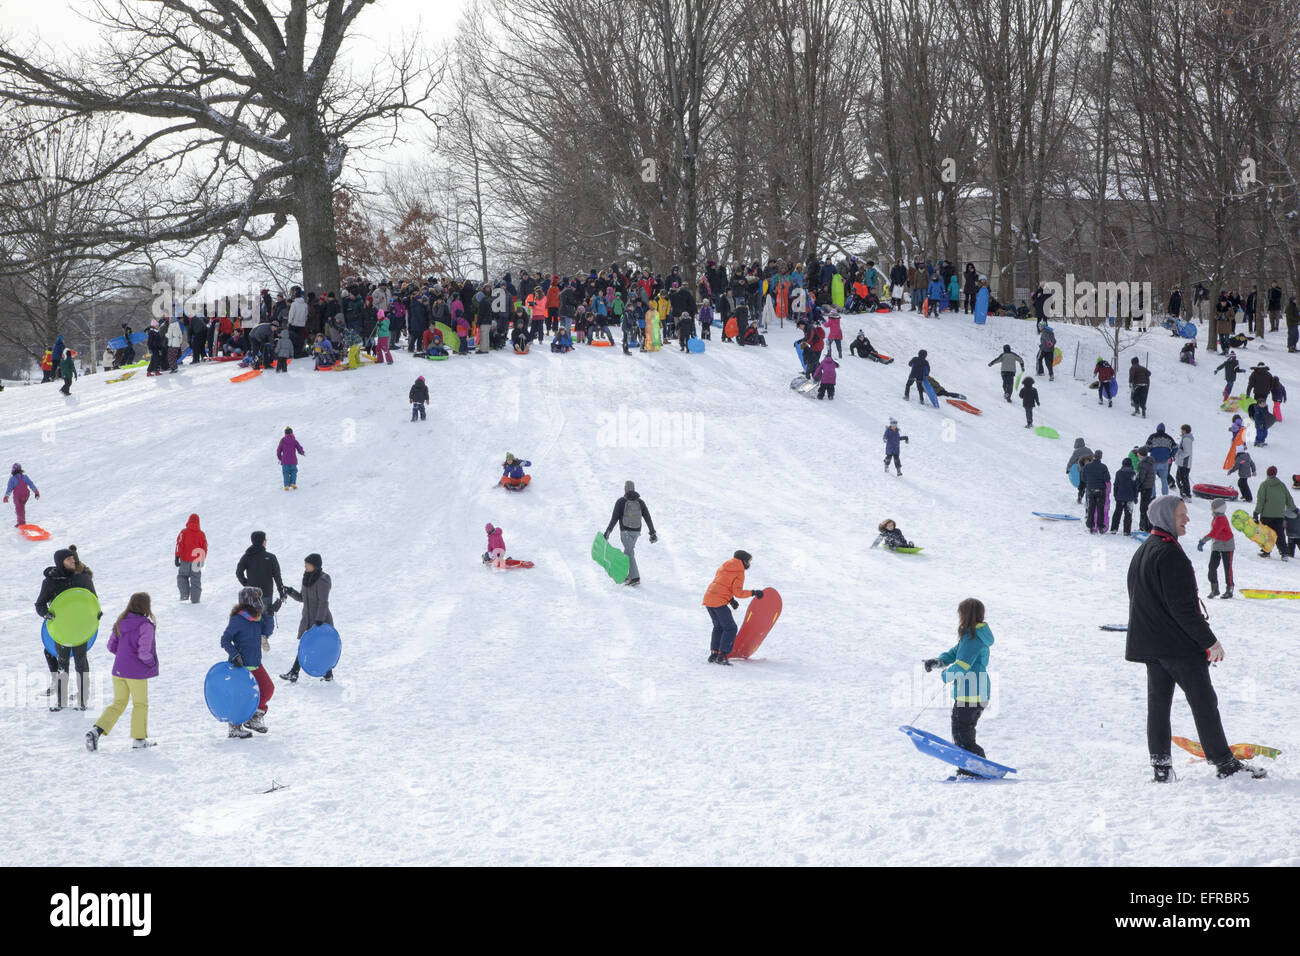 Families sledding and people just out enjoying Prospect Park after a snowfall in Park Slope, Brooklyn, NY. Stock Photo